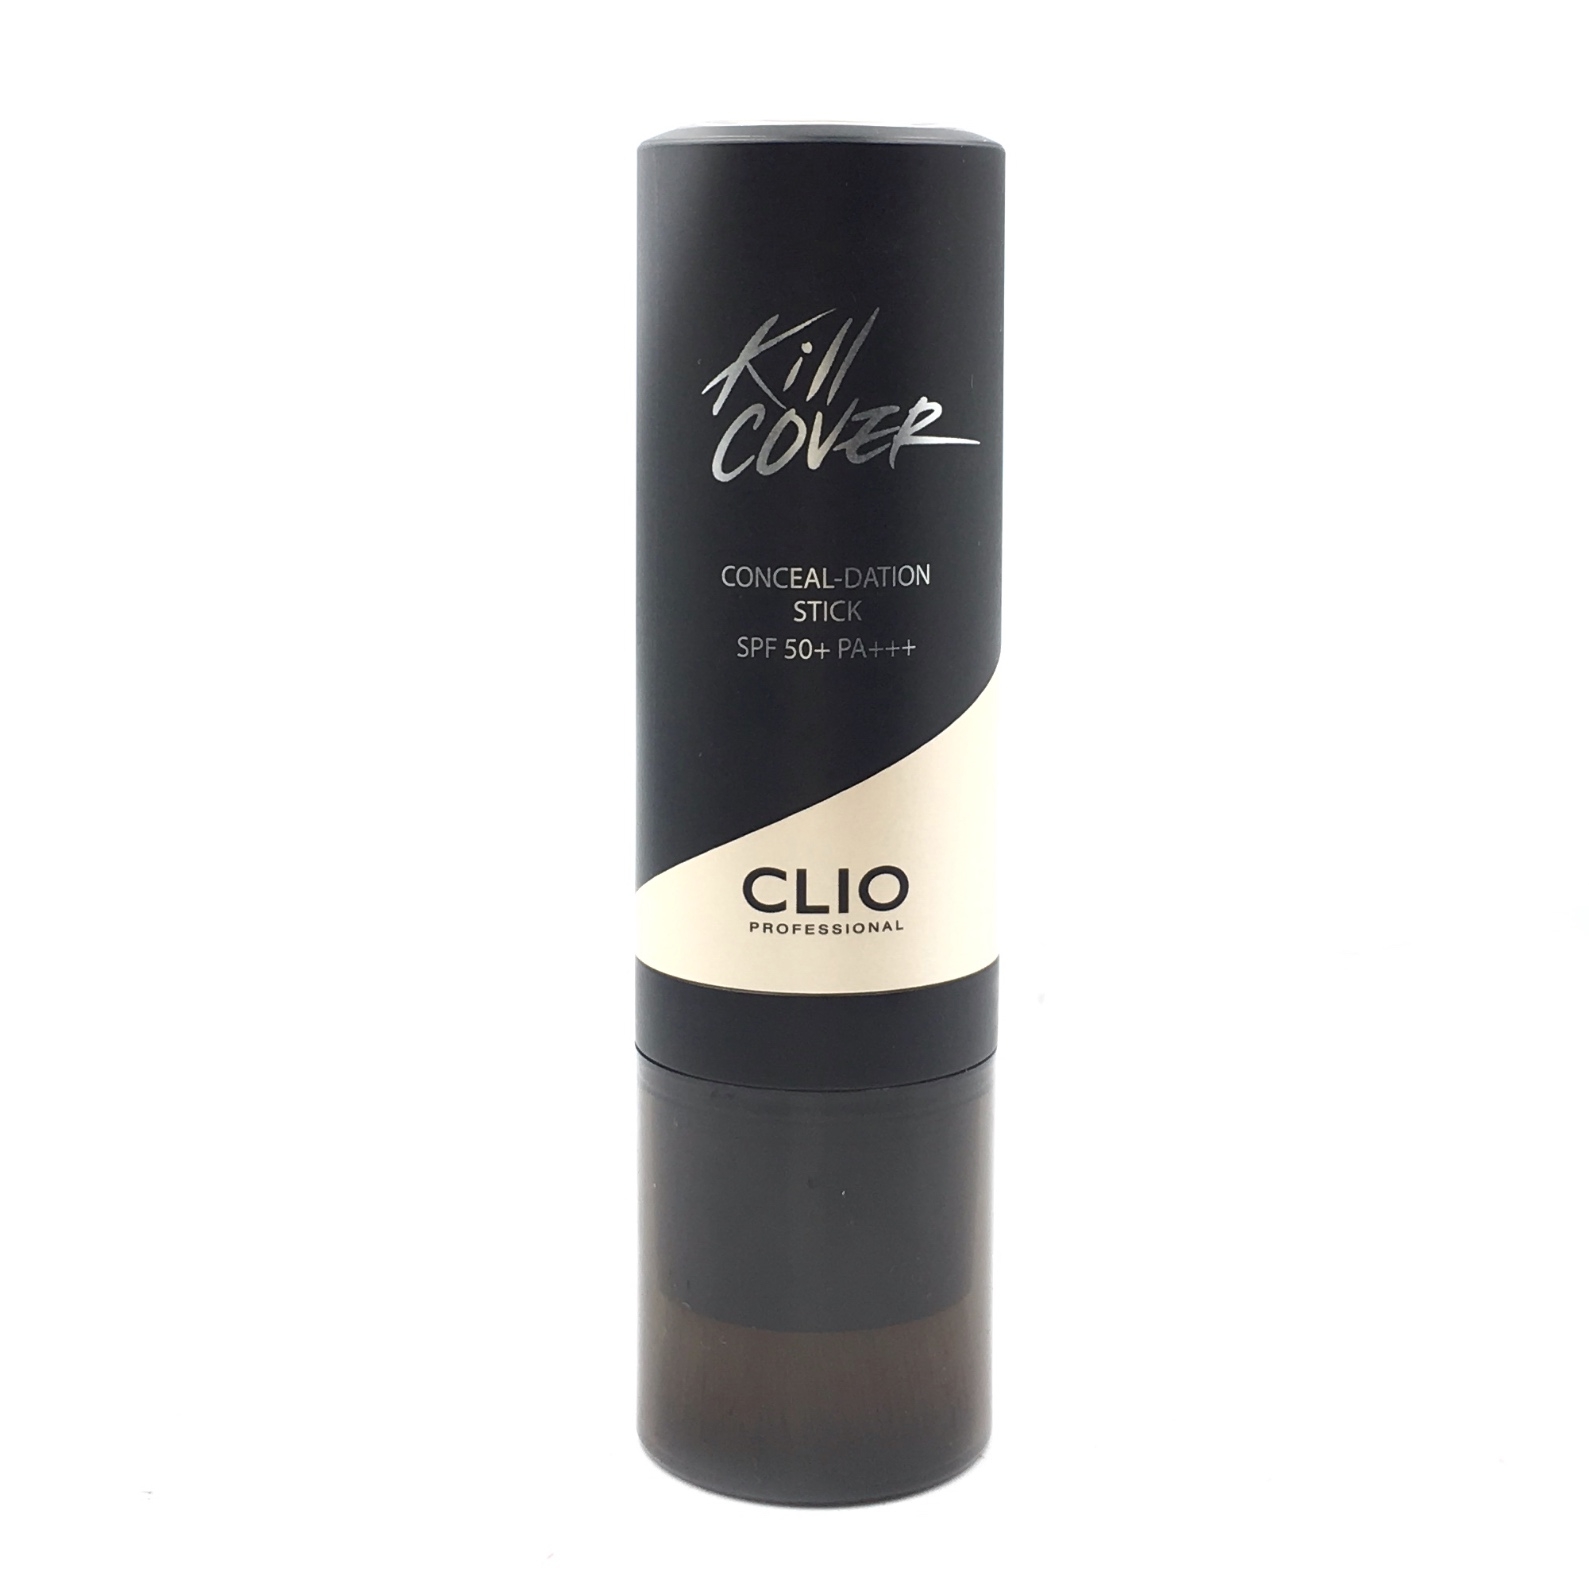 Clio Ginger Kill Cover Conceal - Dation Stick SPF 50+PA +++ Faces